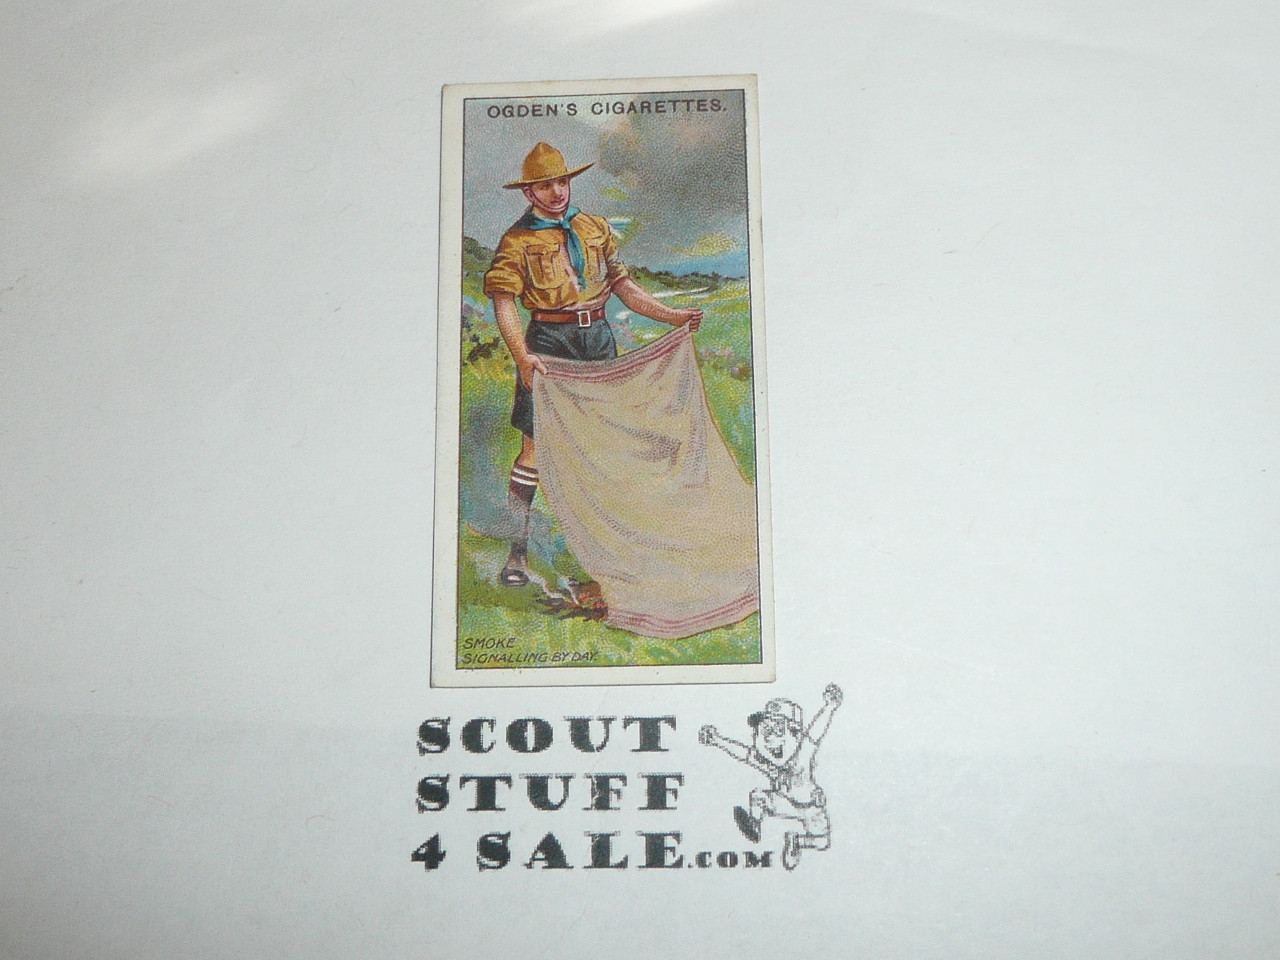 Ogden Tabacco Company Premium Card, Second Boy Scout Series of 50 (Blue Backs), Card #59 Smoke Signalling by Day, 1912